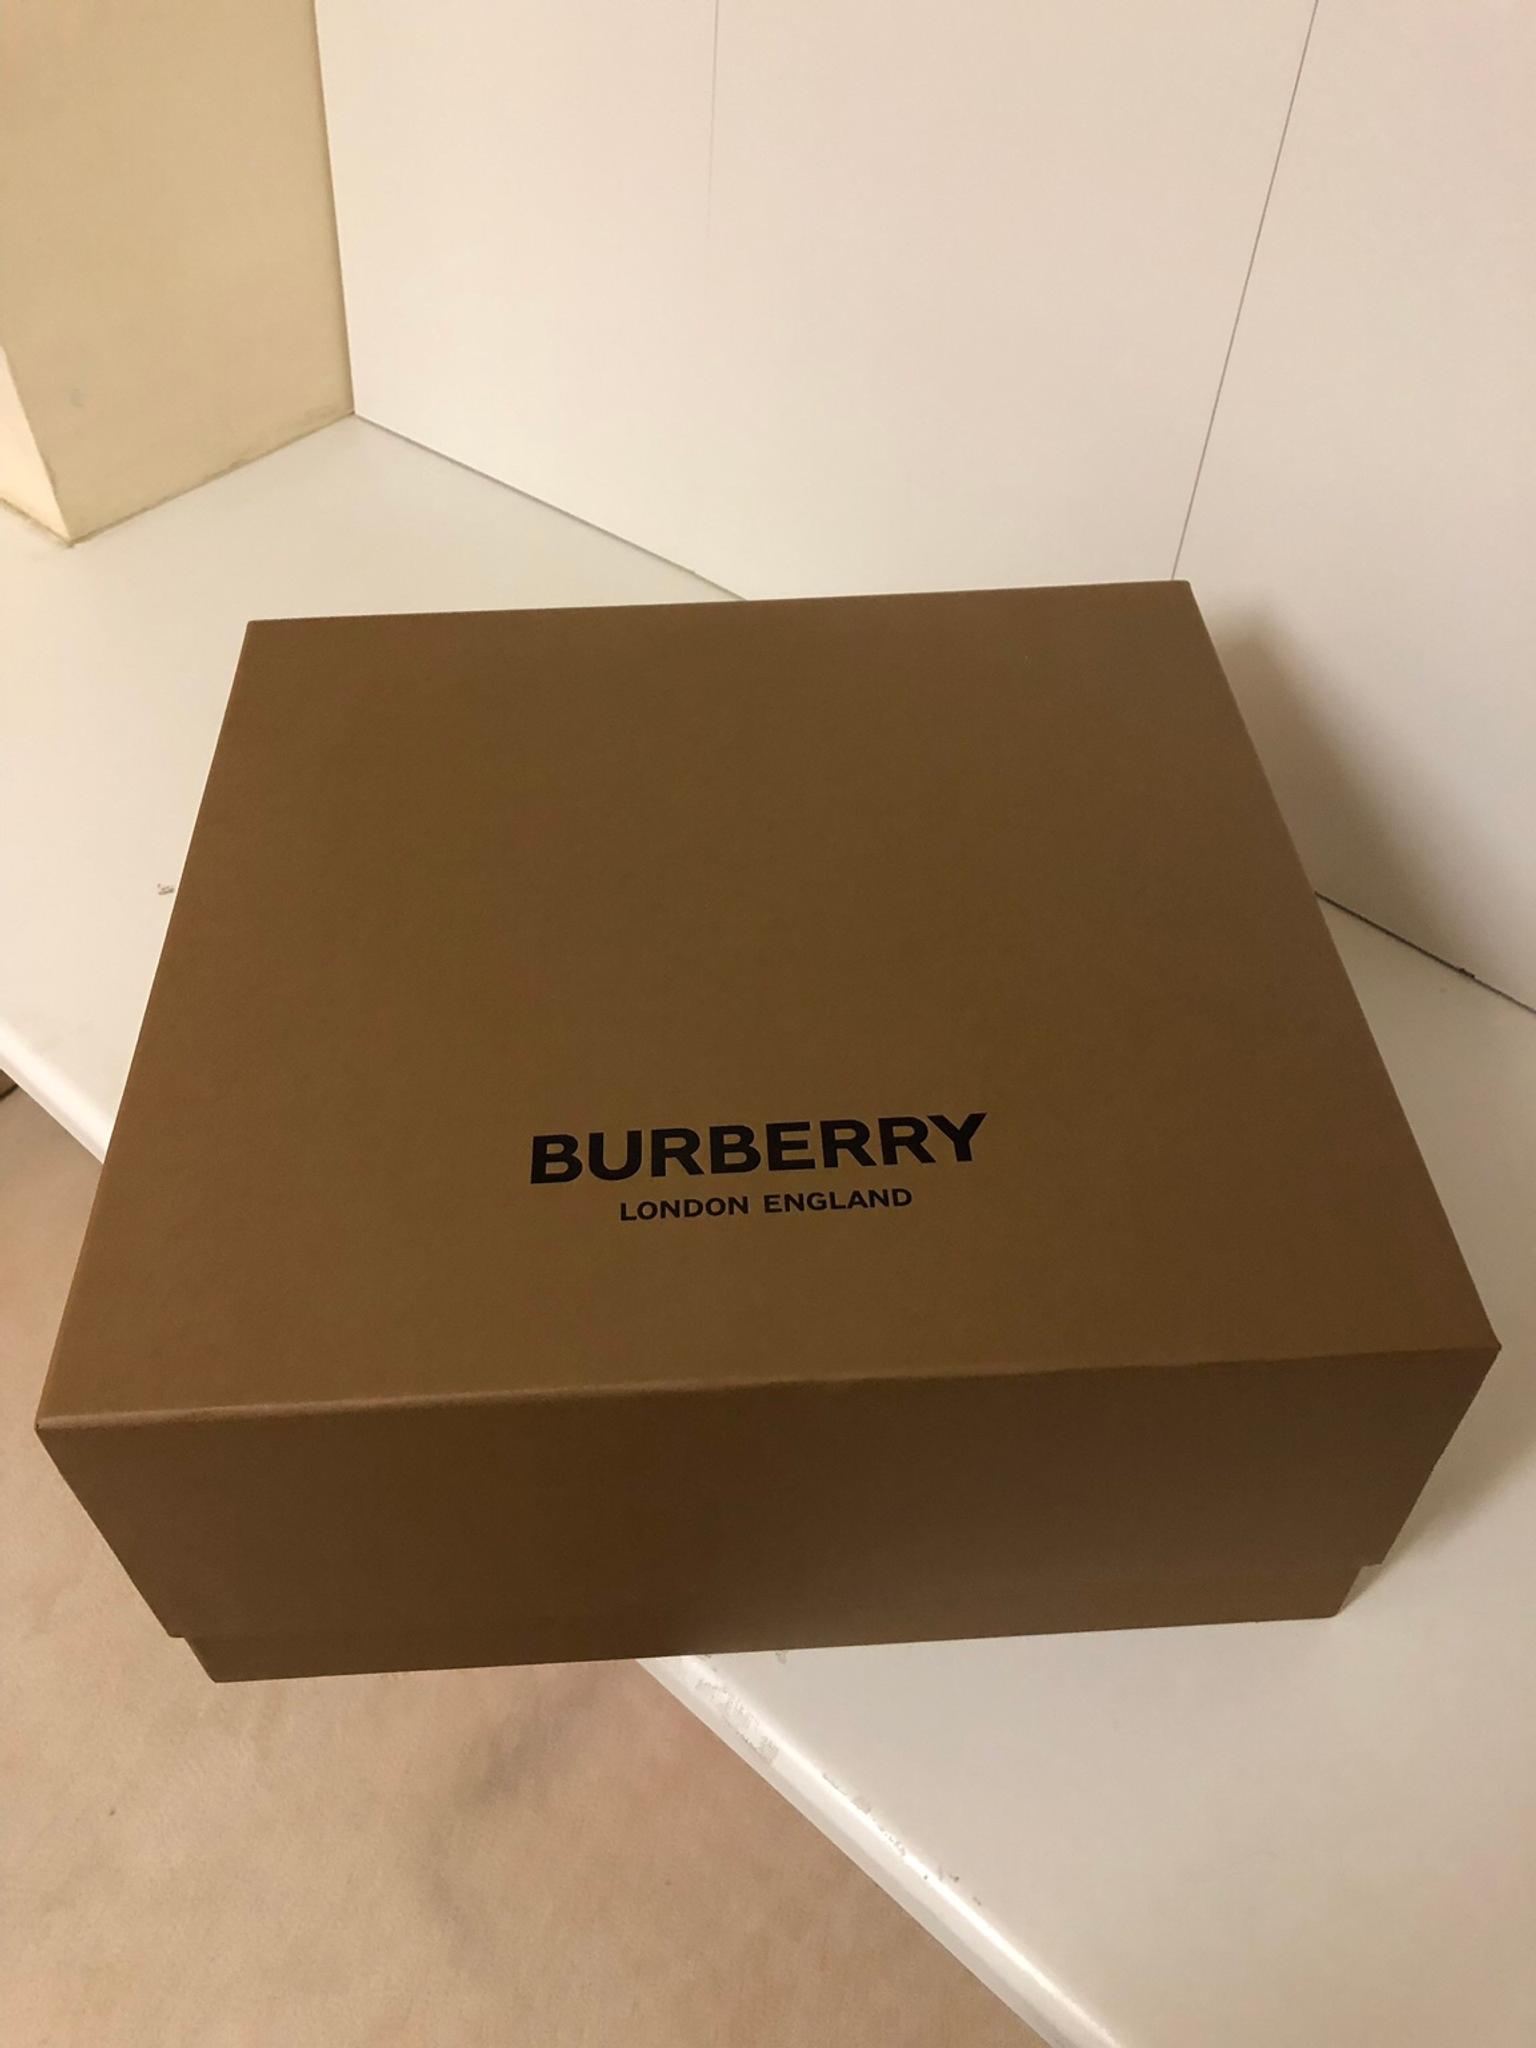 Burberry gift box + paper bag in RG6 